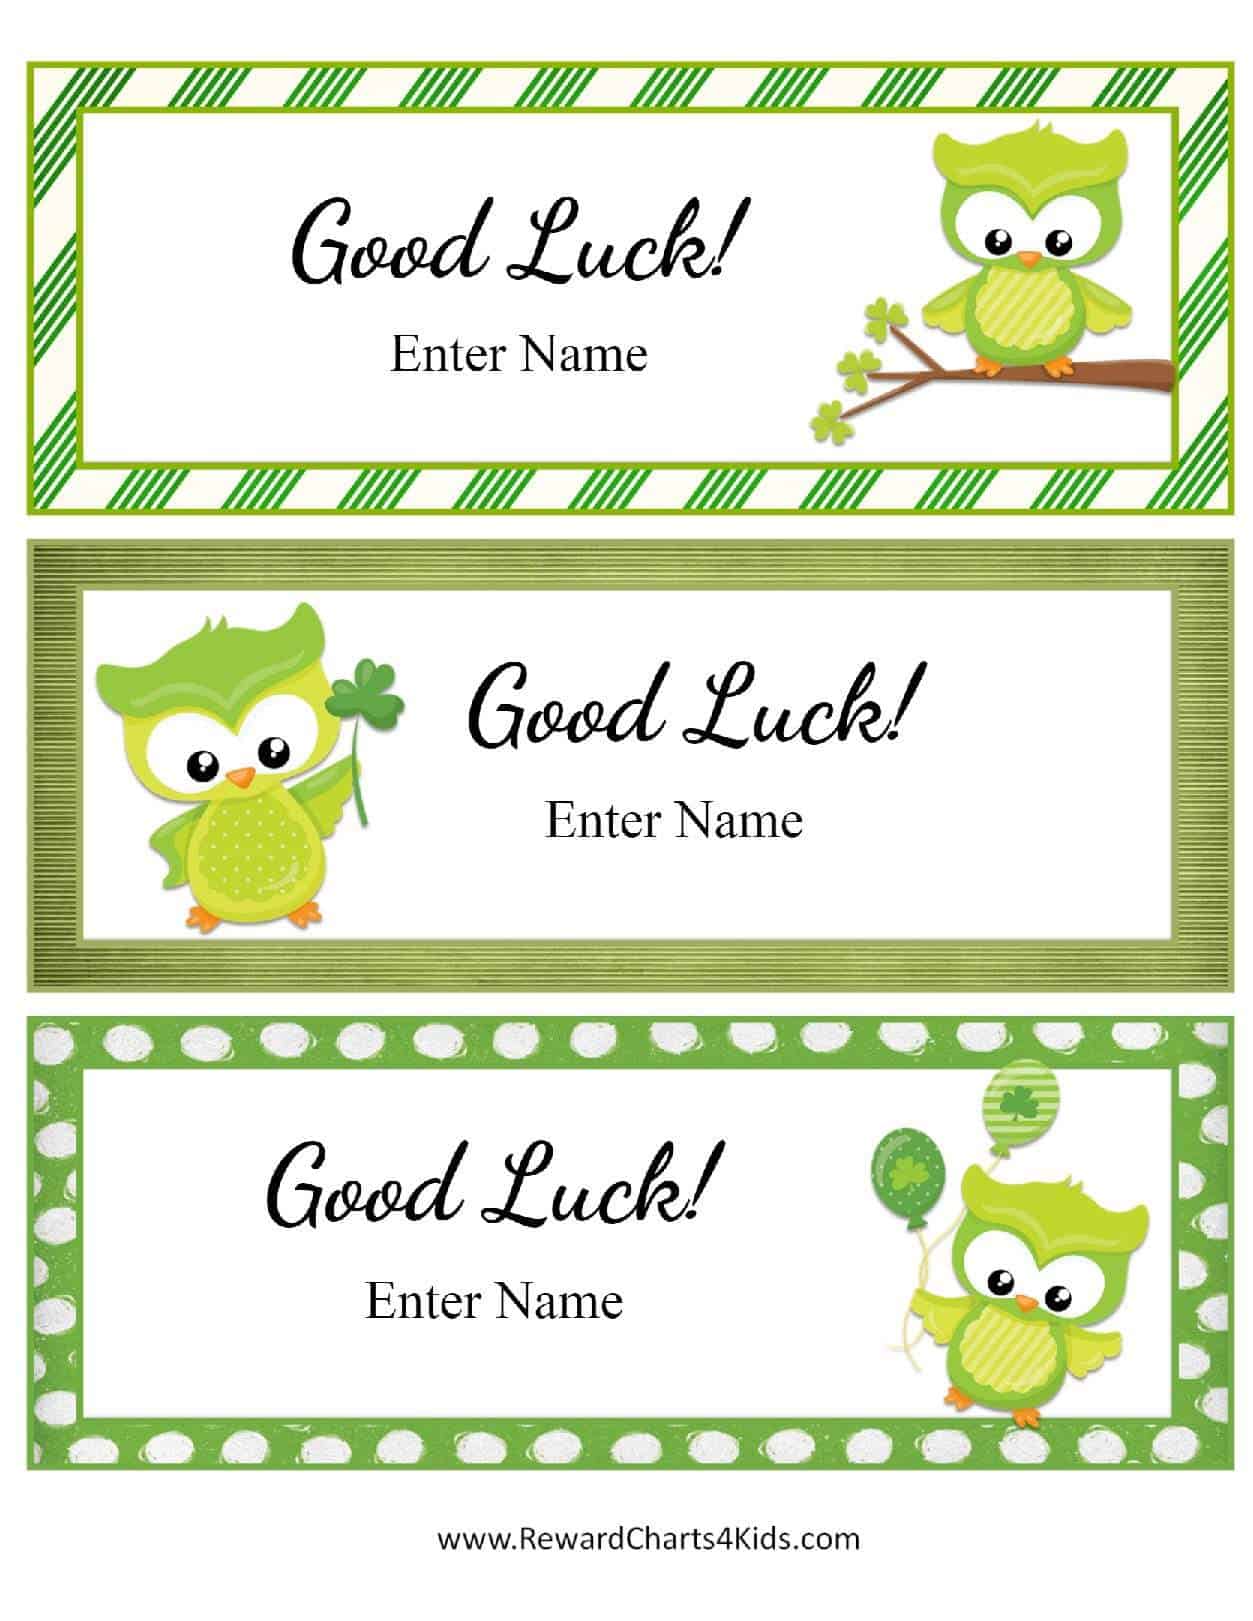 Free Good Luck Cards for Kids Customize Online & Print at Home